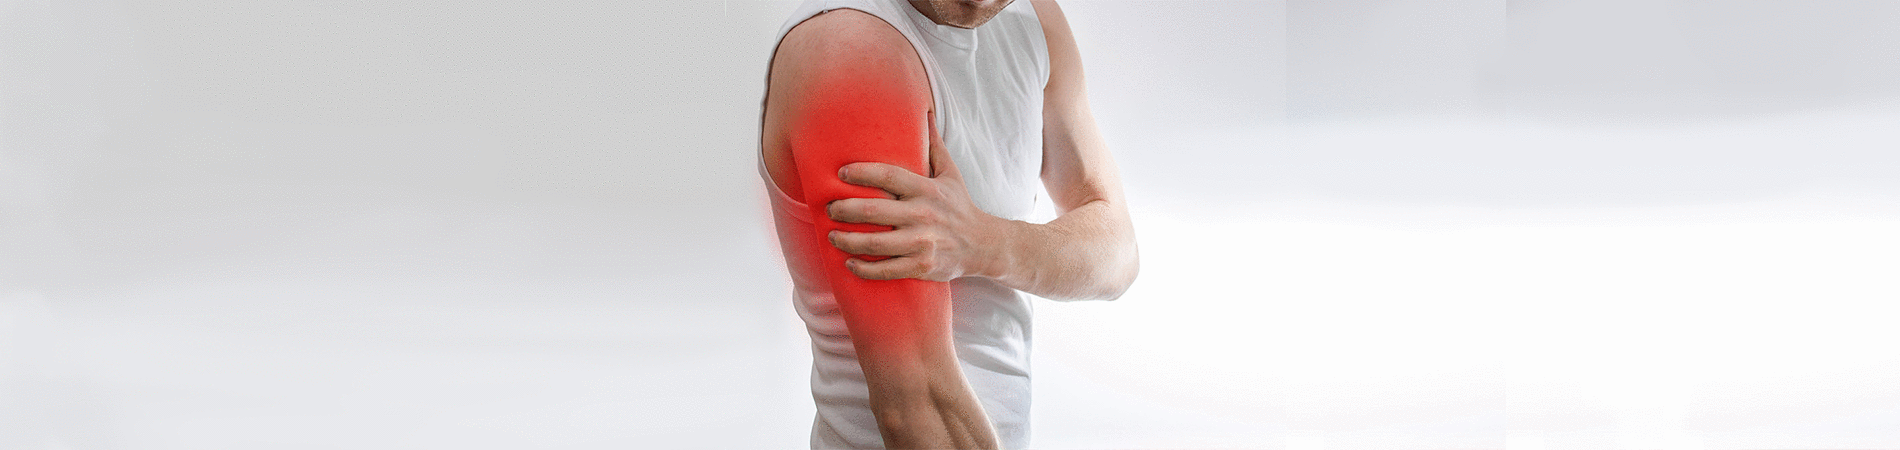 Bicep Strains and Soreness: Causes, Symptoms, Treatments, Recovery & Prevention